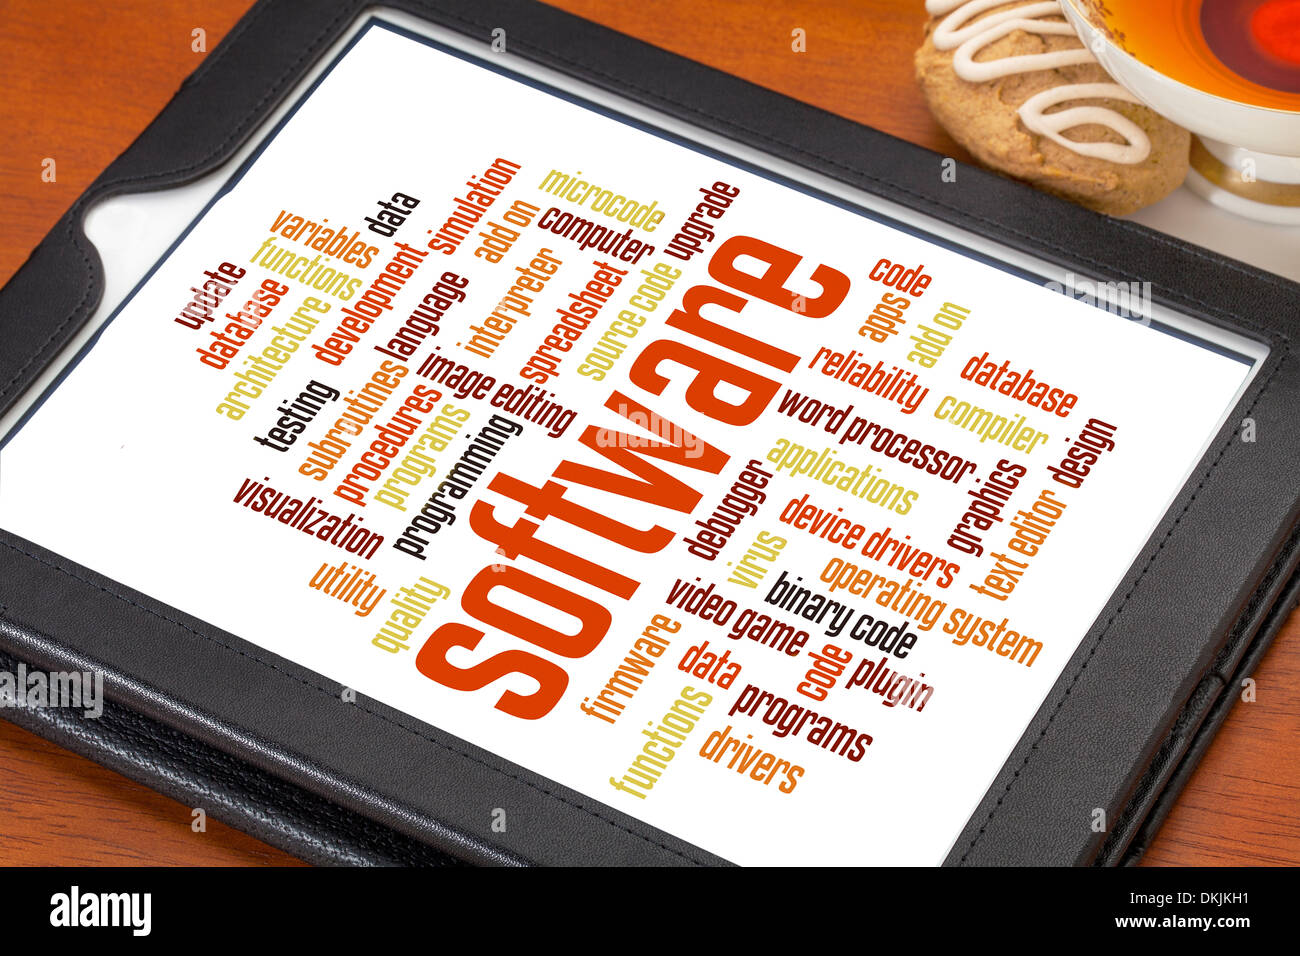 software and computer program word cloud on a digital tablet with a cup of tea Stock Photo